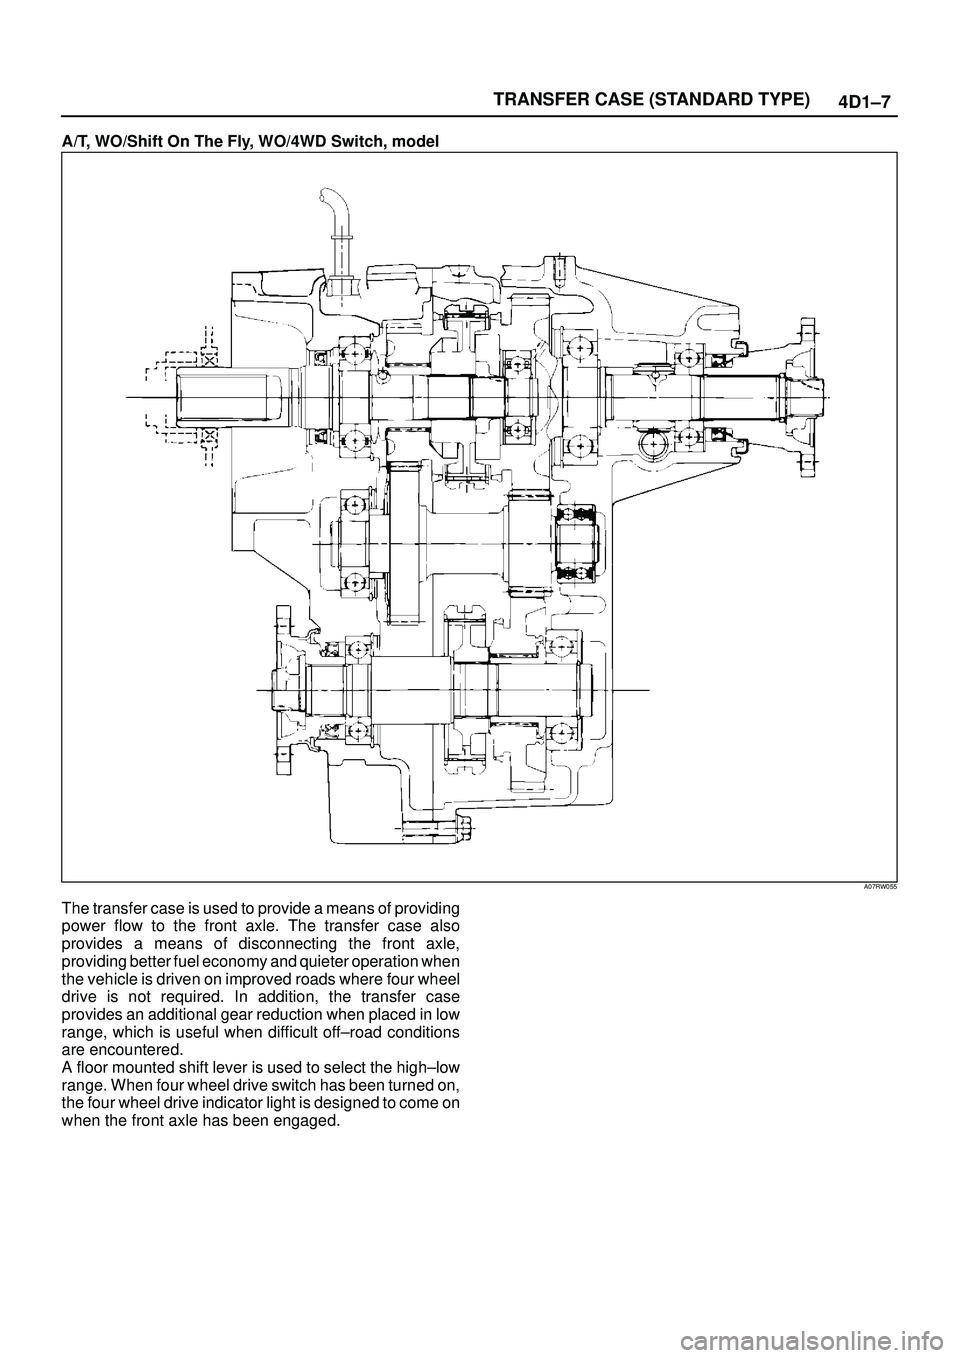 ISUZU TROOPER 1998  Service Repair Manual TRANSFER CASE (STANDARD TYPE)
4D1±7
A/T, WO/Shift On The Fly, WO/4WD Switch, model
A07RW055
The transfer case is used to provide a means of providing
power flow to the front axle. The transfer case a